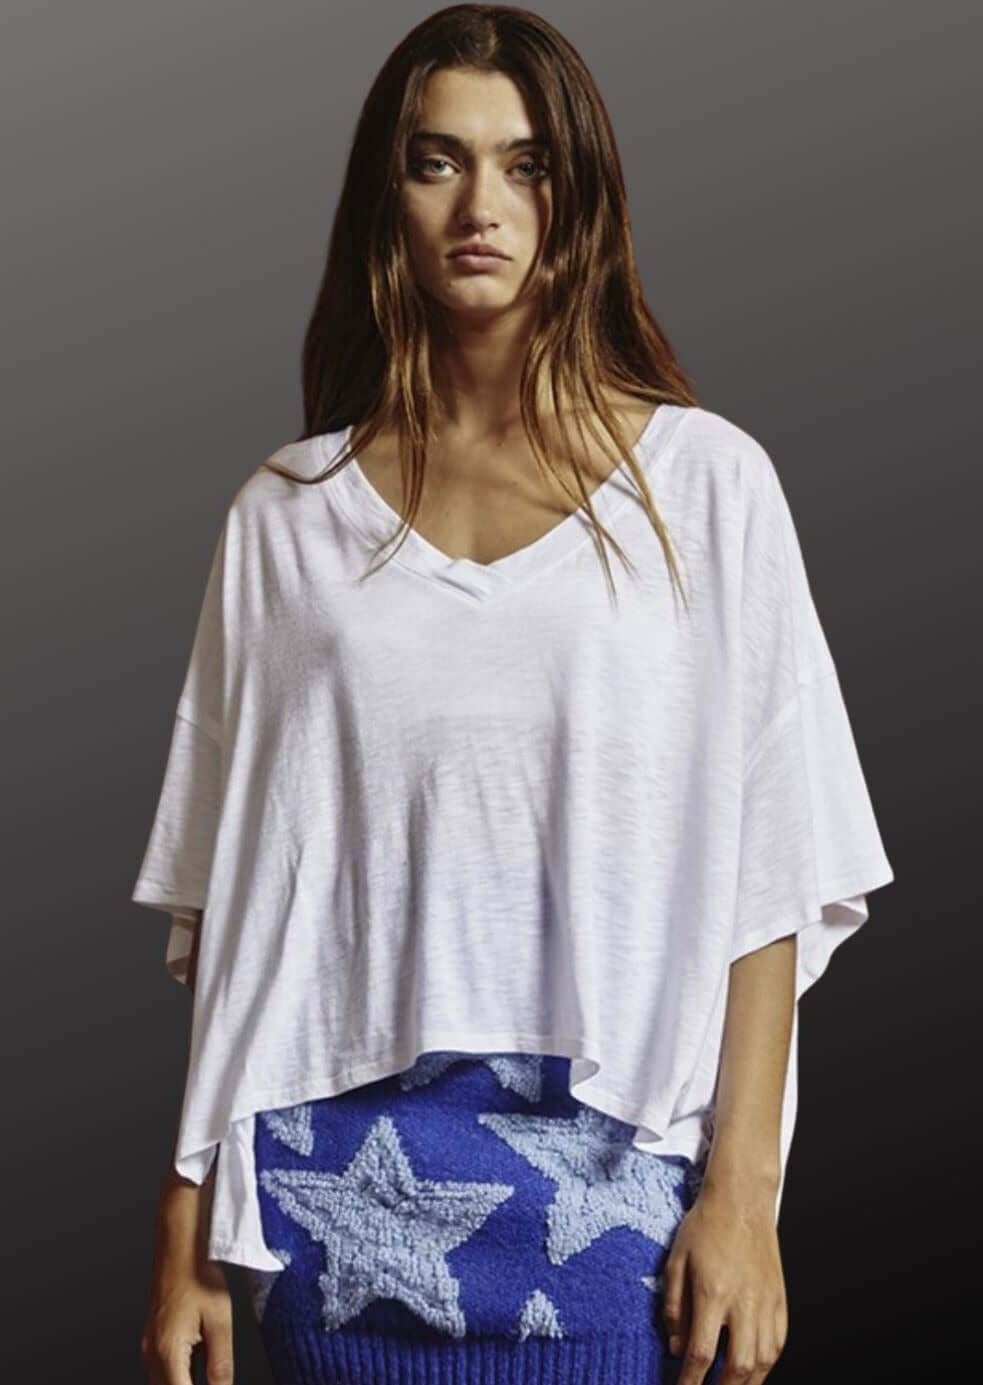 Bucket List Clothing Style# T1722 | Women's V-Neck Boxy Oversized Slub Tee Shirt in White  | Made in USA | Classy Cozy Cool Women's Made in America Clothing Boutique